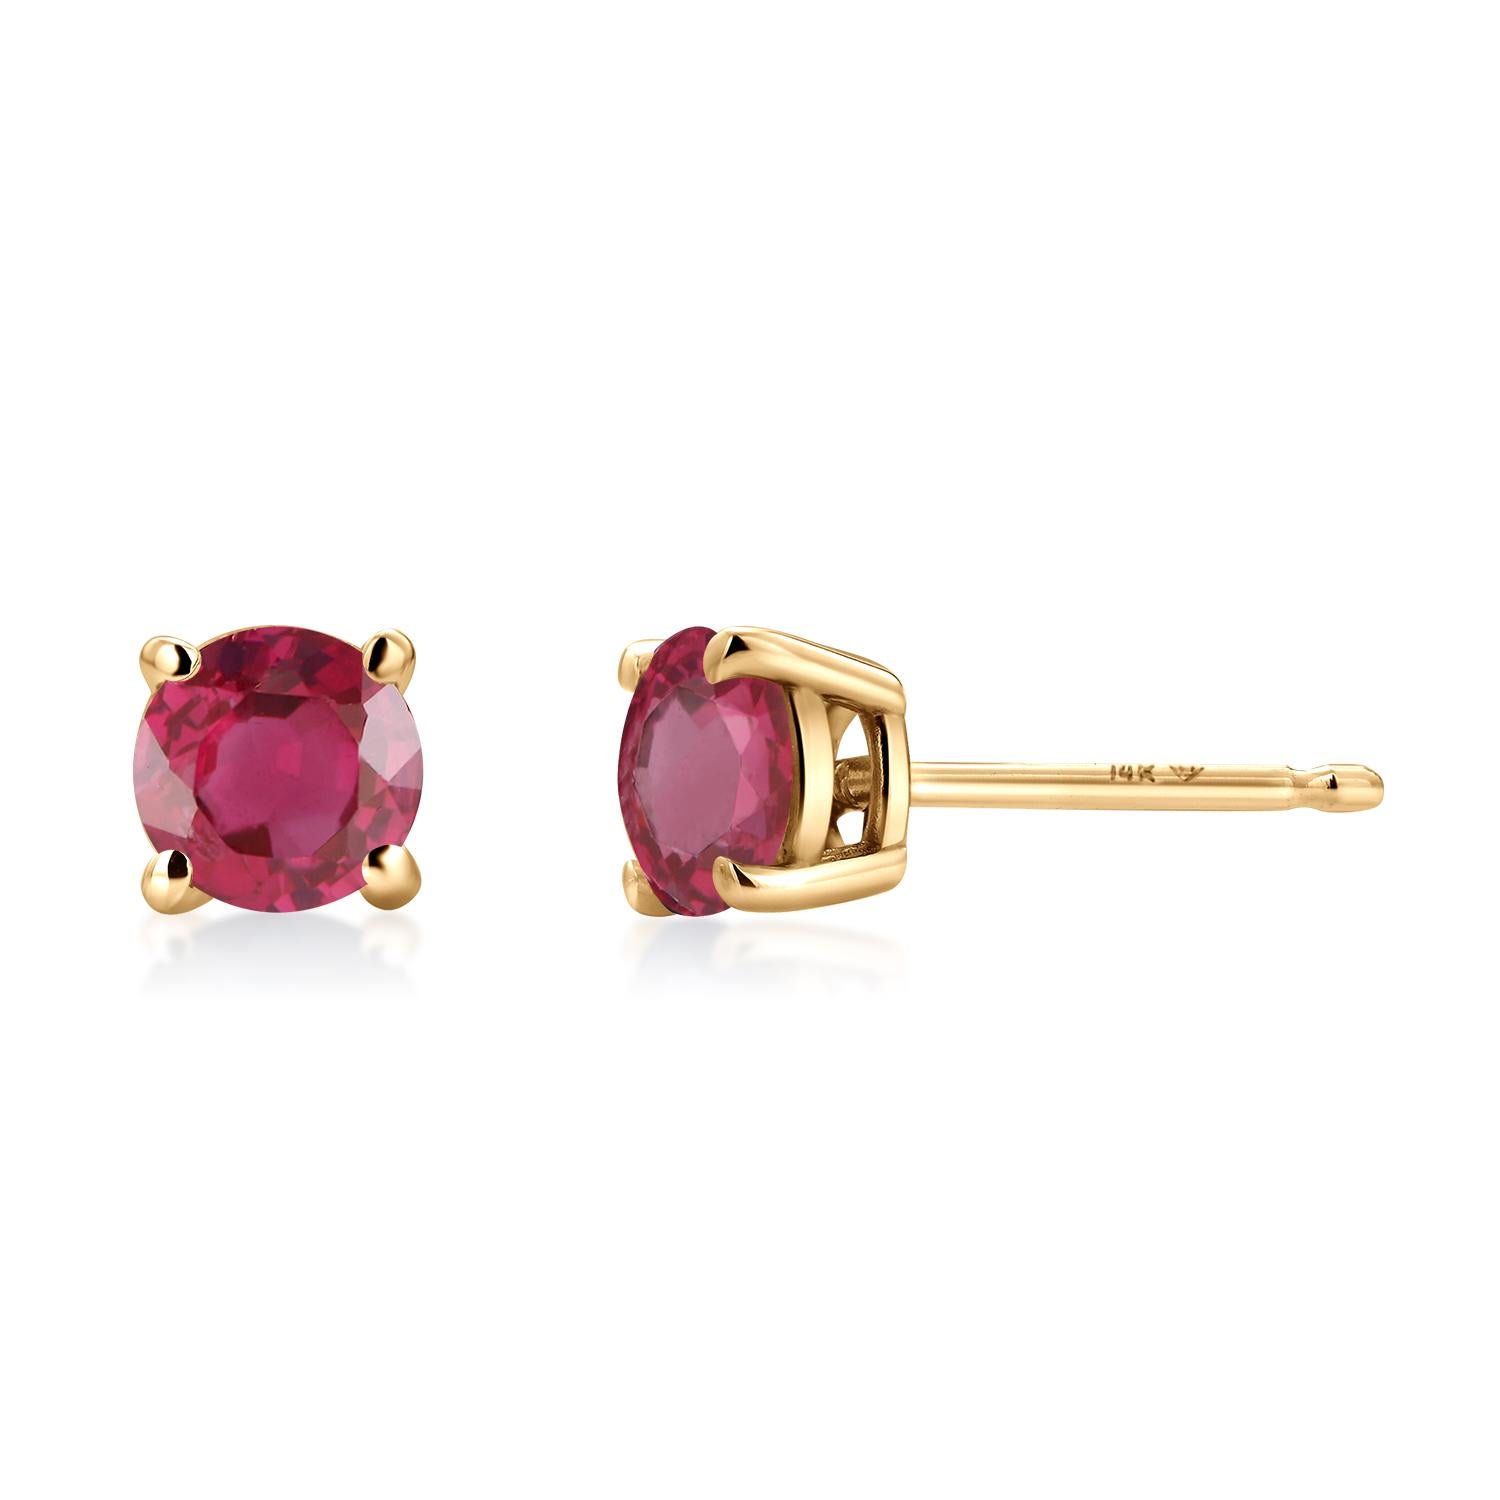 Two Matched Burma Rubies Weighing 1.05 Carat 0.20 Inch Yellow Gold Stud Earrings For Sale 1